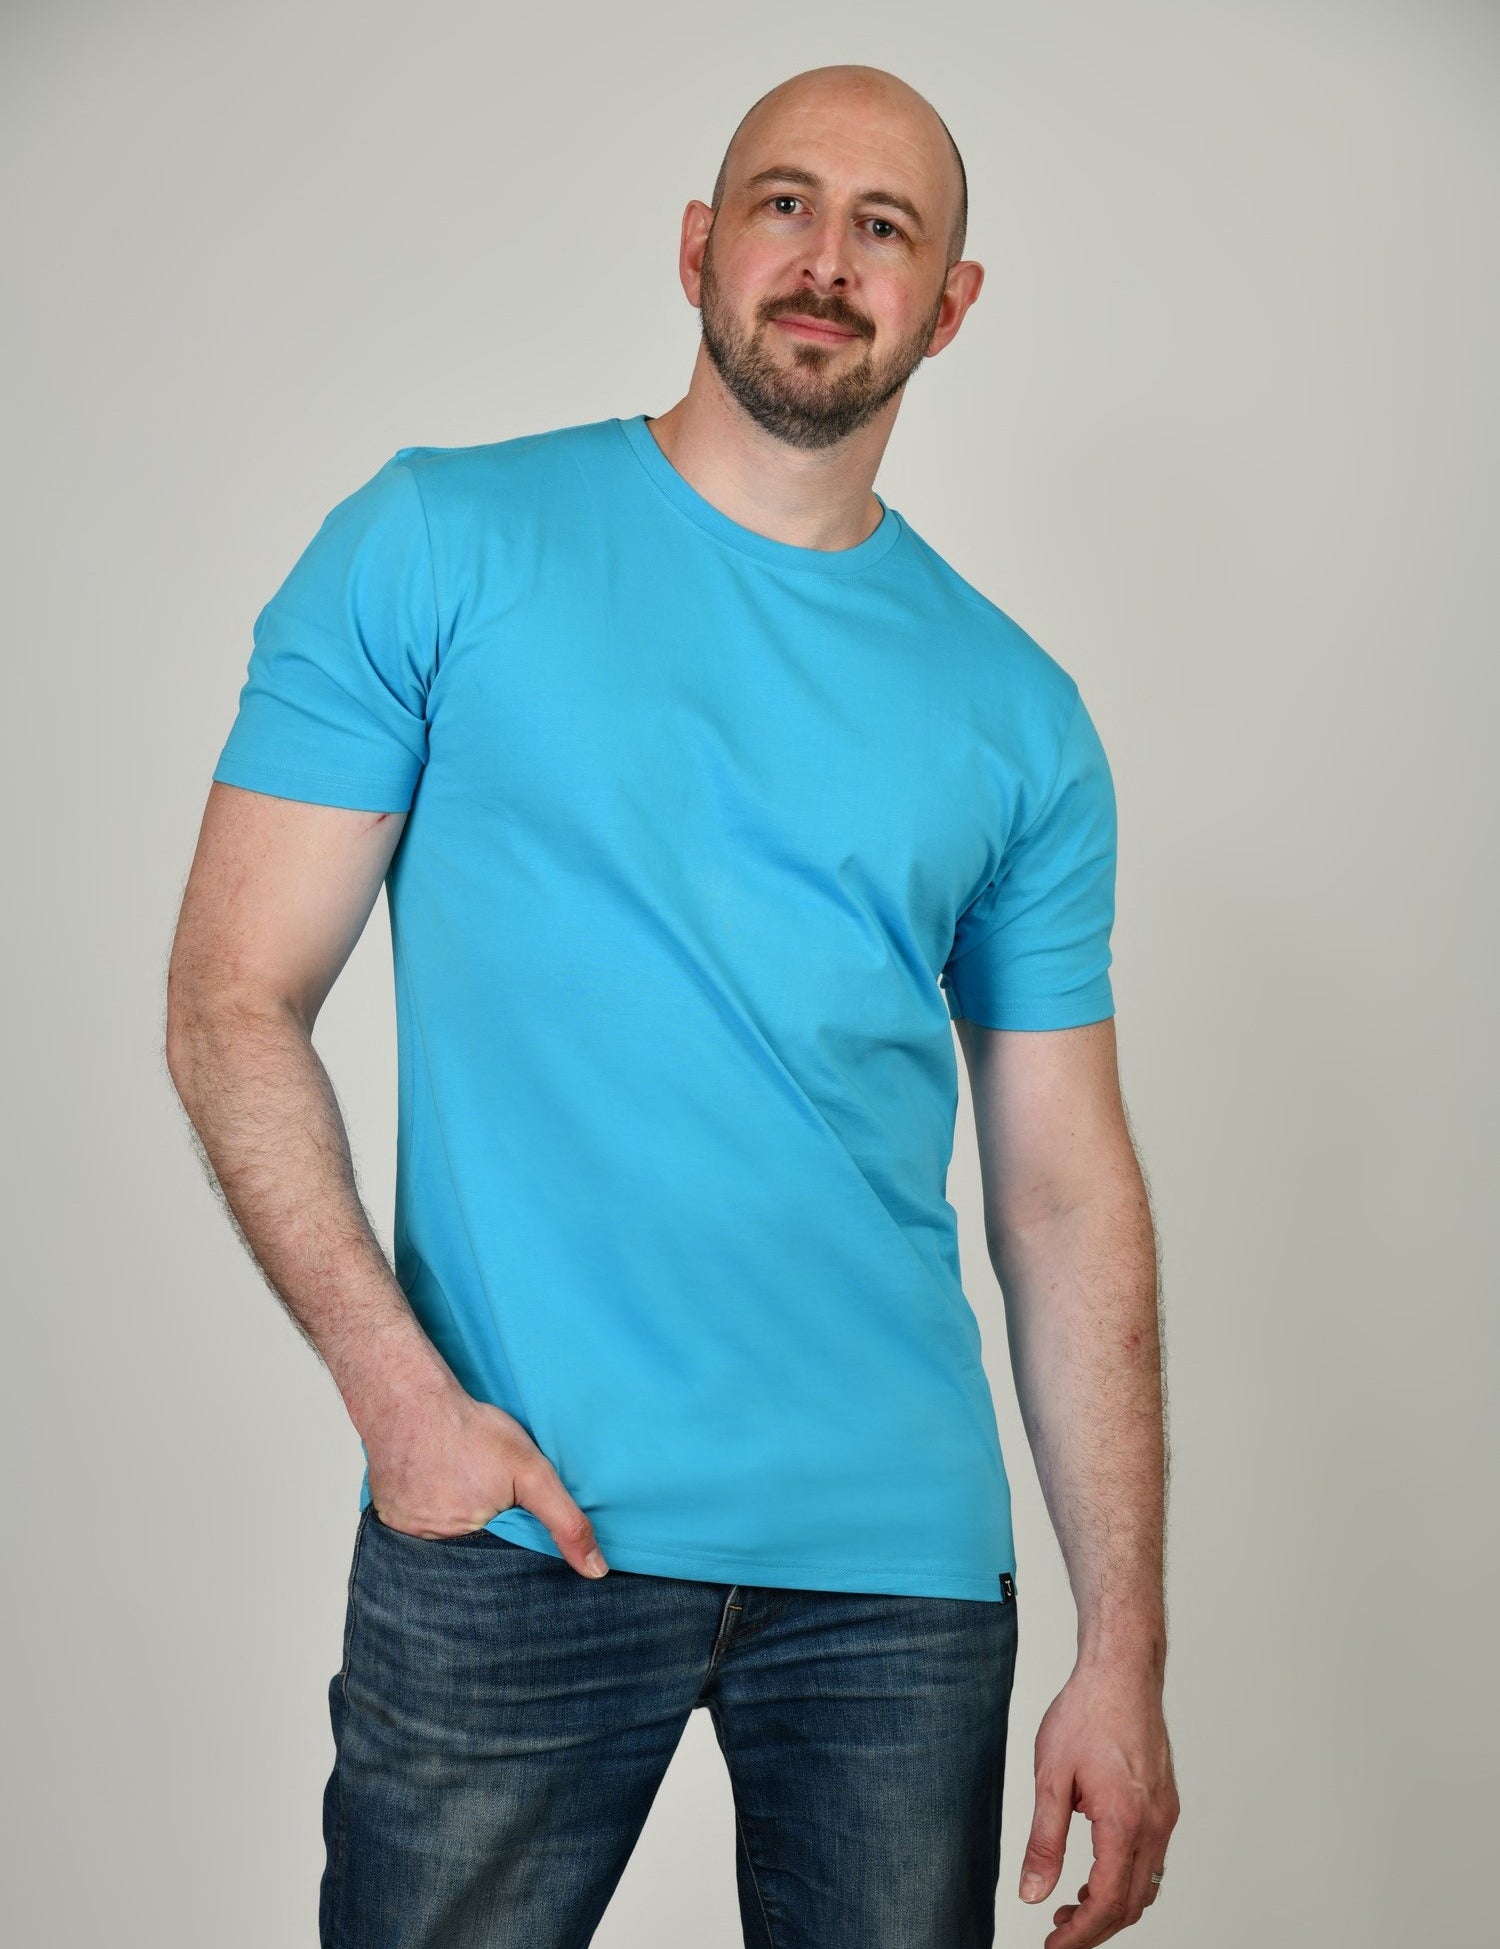 A tall and slim man in the studio standing in front of a light background with one hand in his pocket. The model is wearing an extra long slim cyan blue t-shirt in a size XL. The cyan blue t-shirt features a 3" longer body, 100% organic cotton, and is soft & preshrunk. The cyan blue t-shirt is ideal for tall slim men 6'2"+.